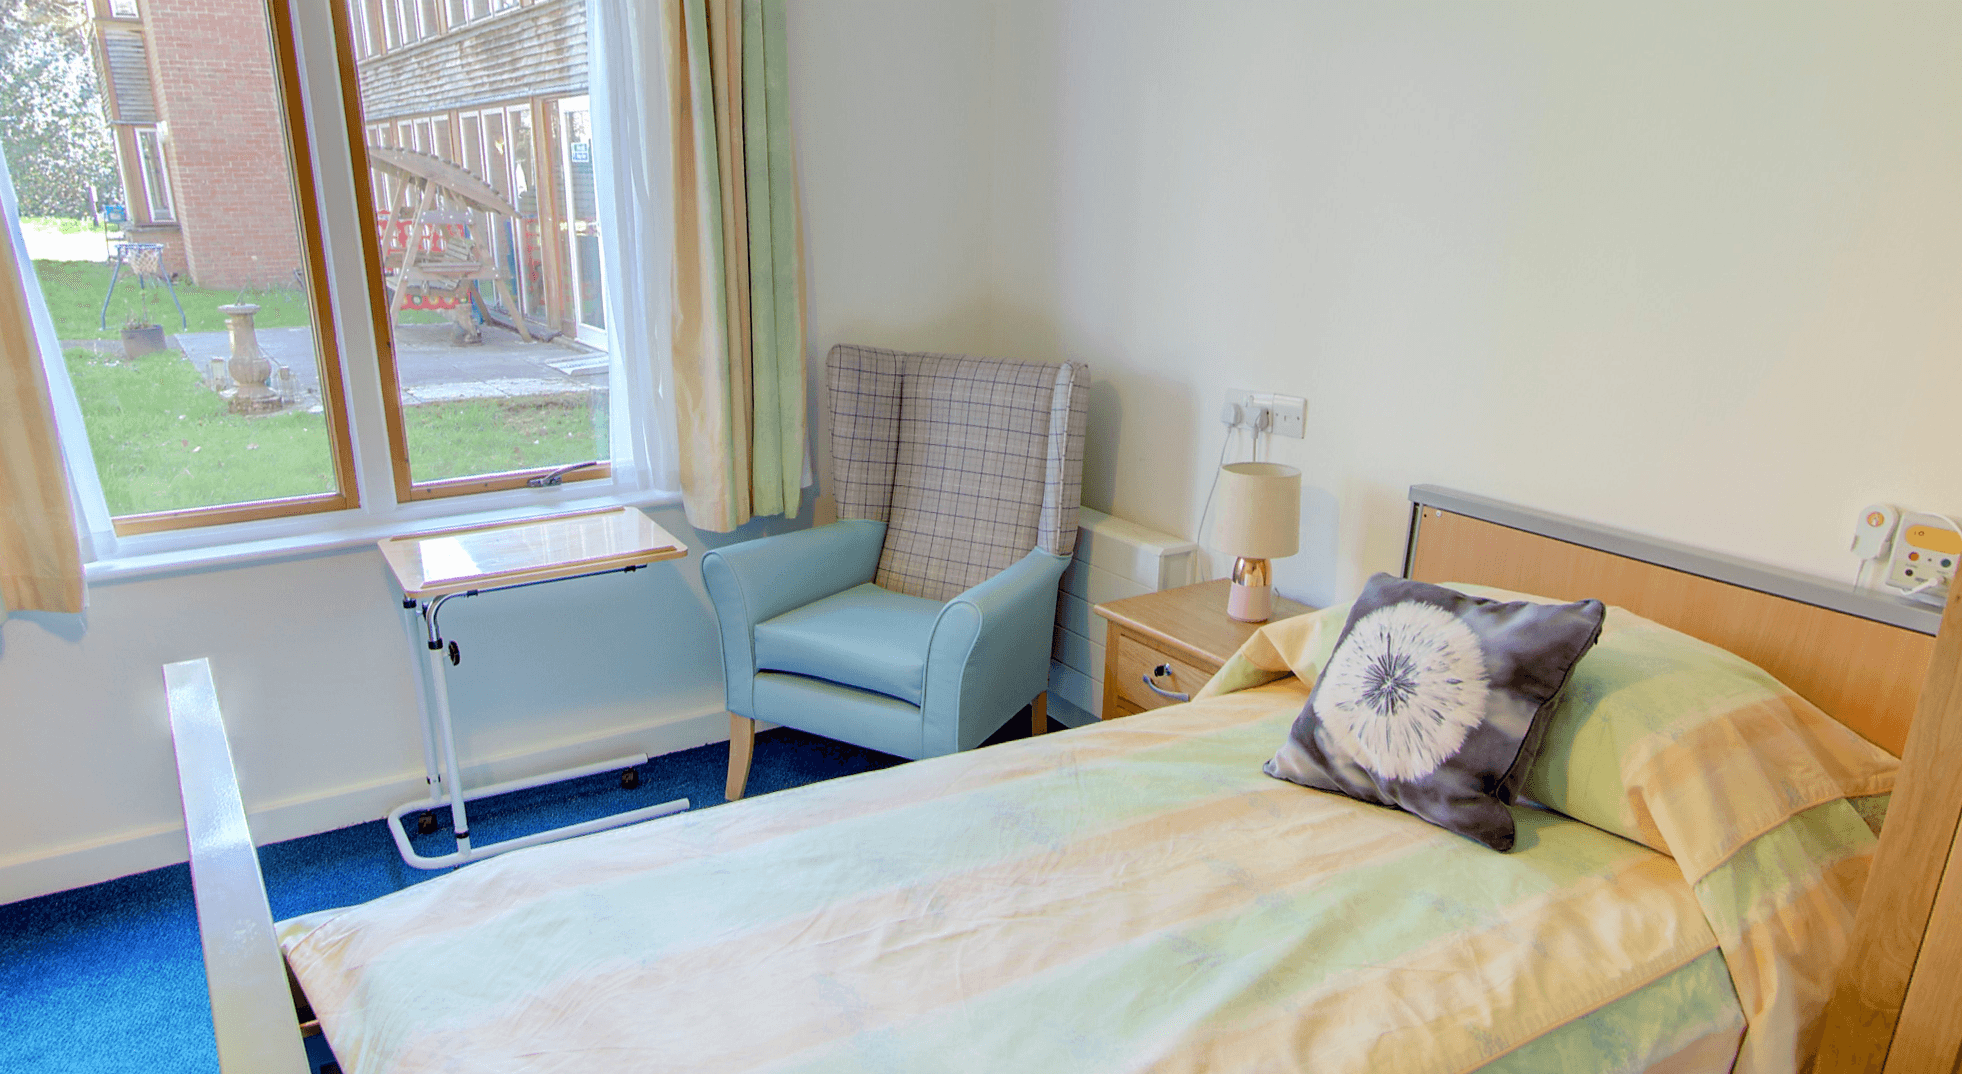 Shaw Healthcare - Deerswood Lodge care home 017